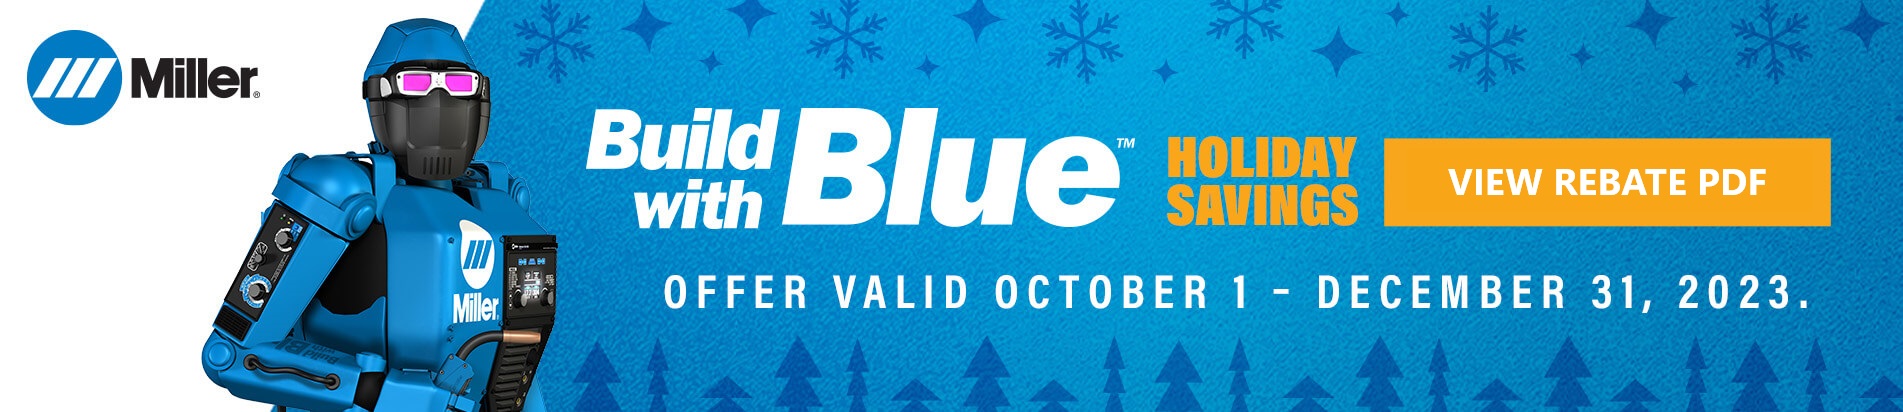 Miller Build With Blue Holiday Savings 2023